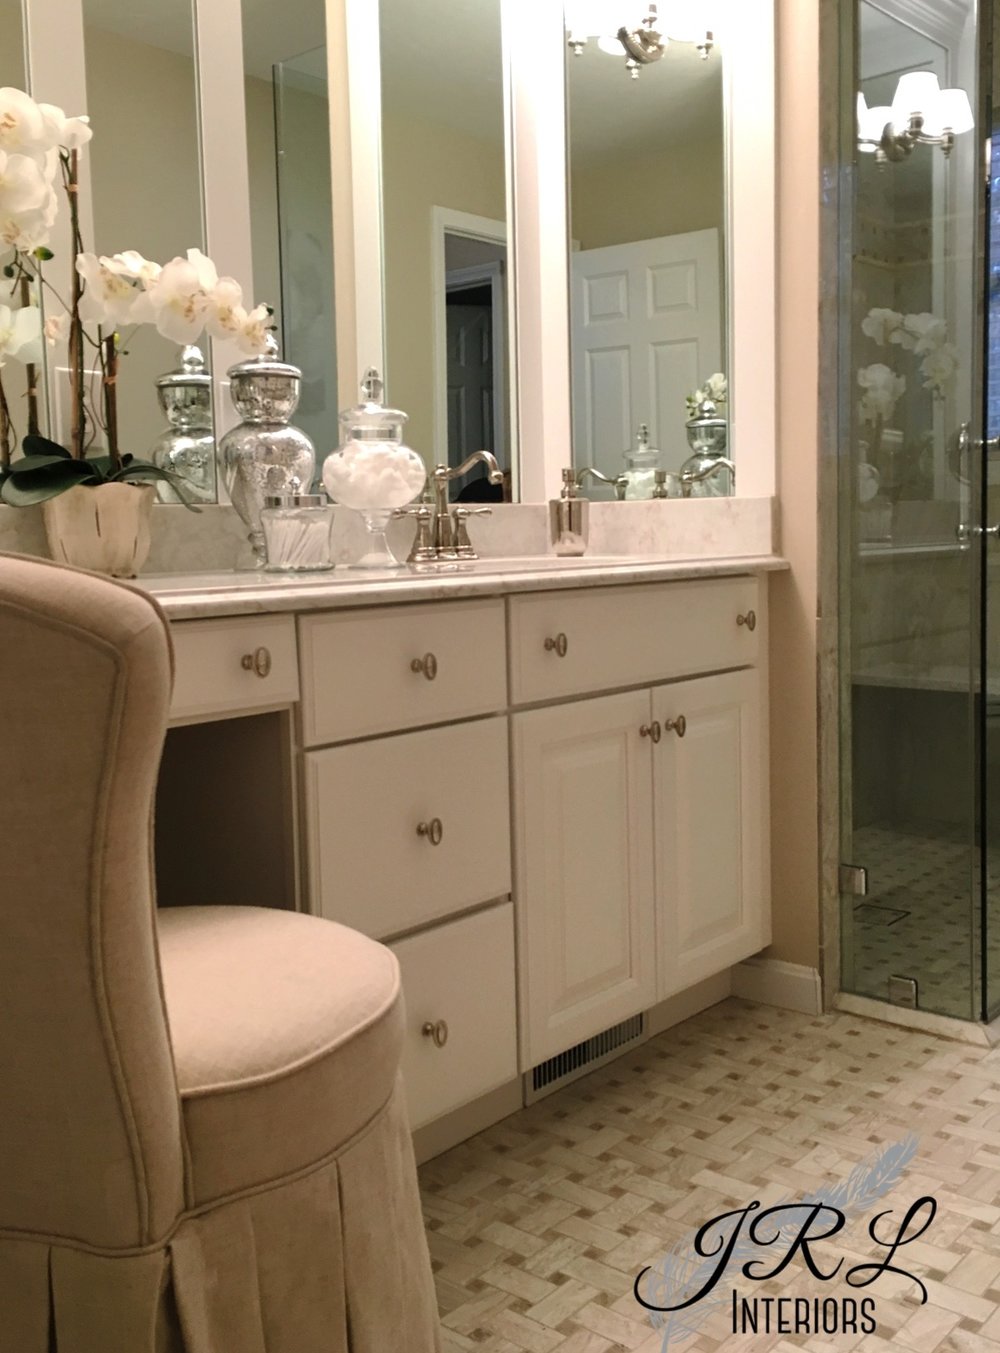 Jrl Interiors What Height Stool Do I, Makeup Vanity Cabinet Height